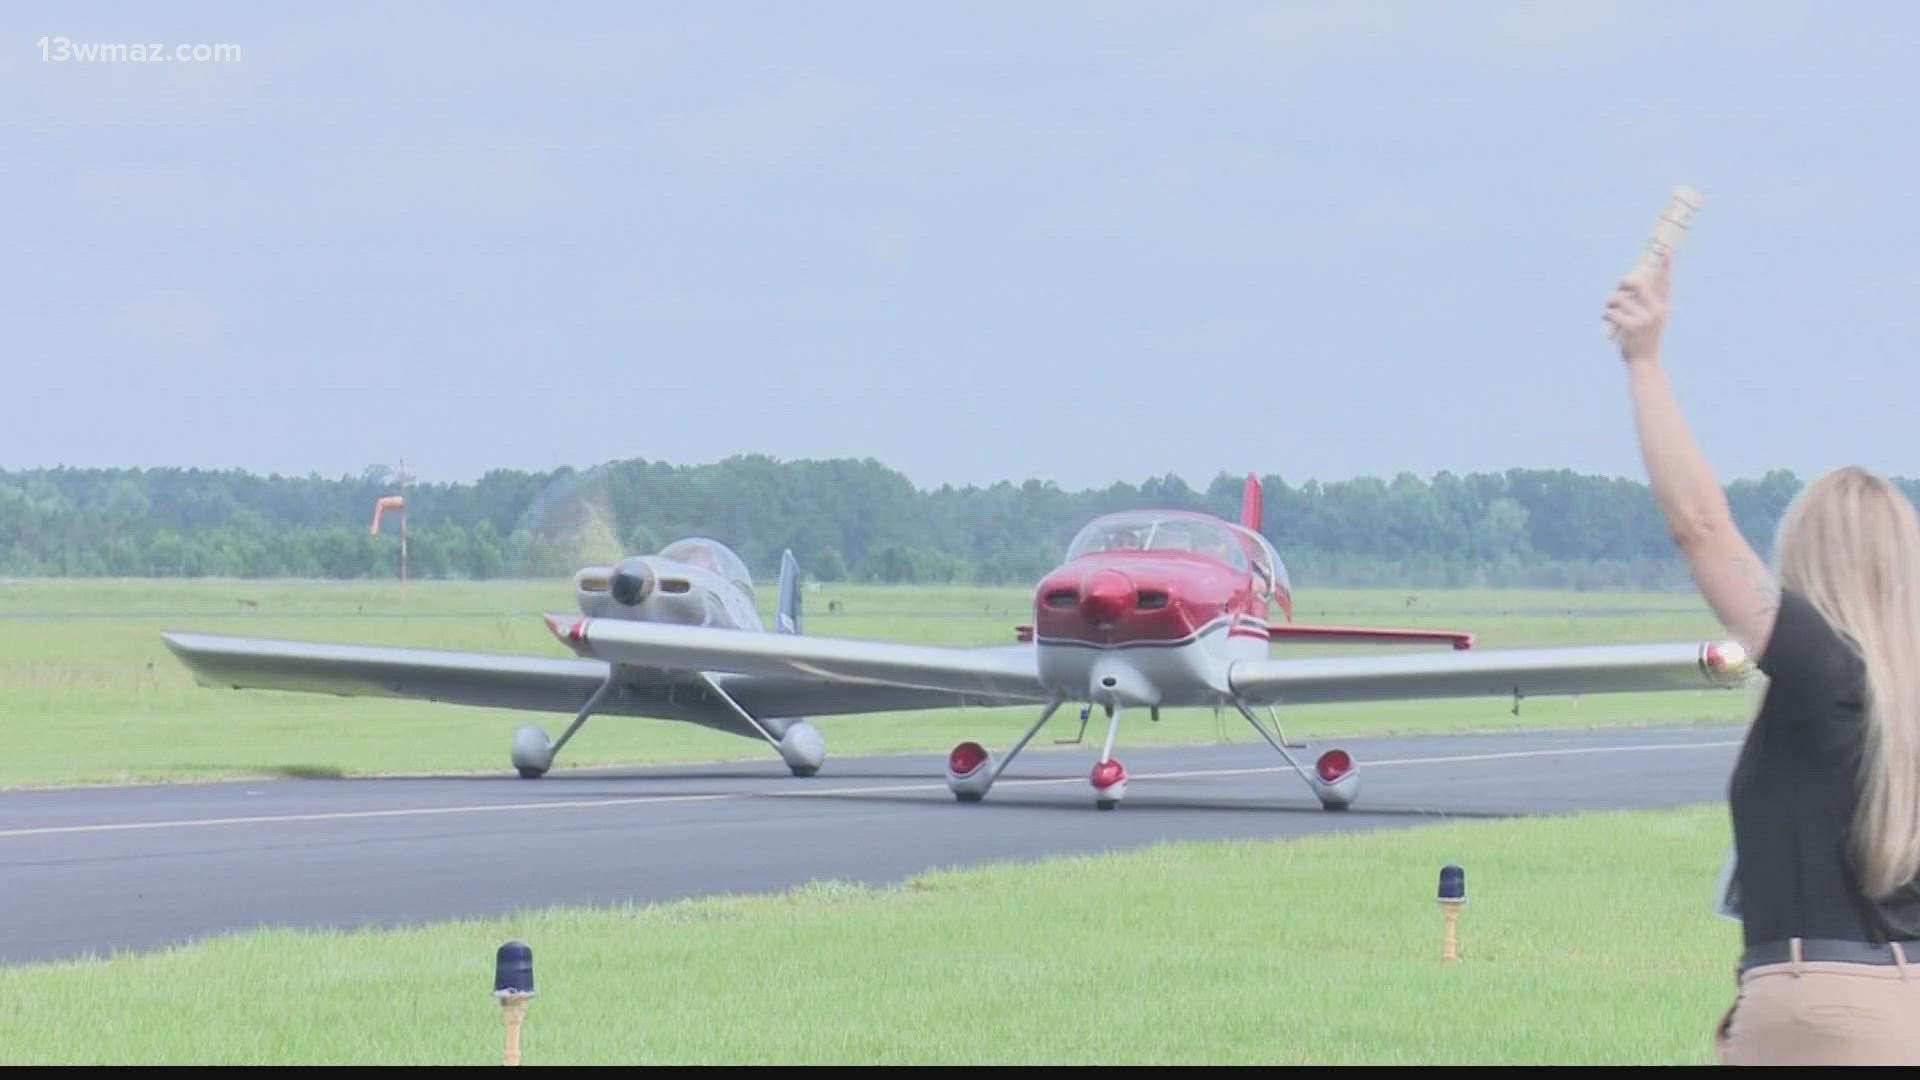 Students at the university saw aircraft from all over Central Georgia, including an unexpected visit.